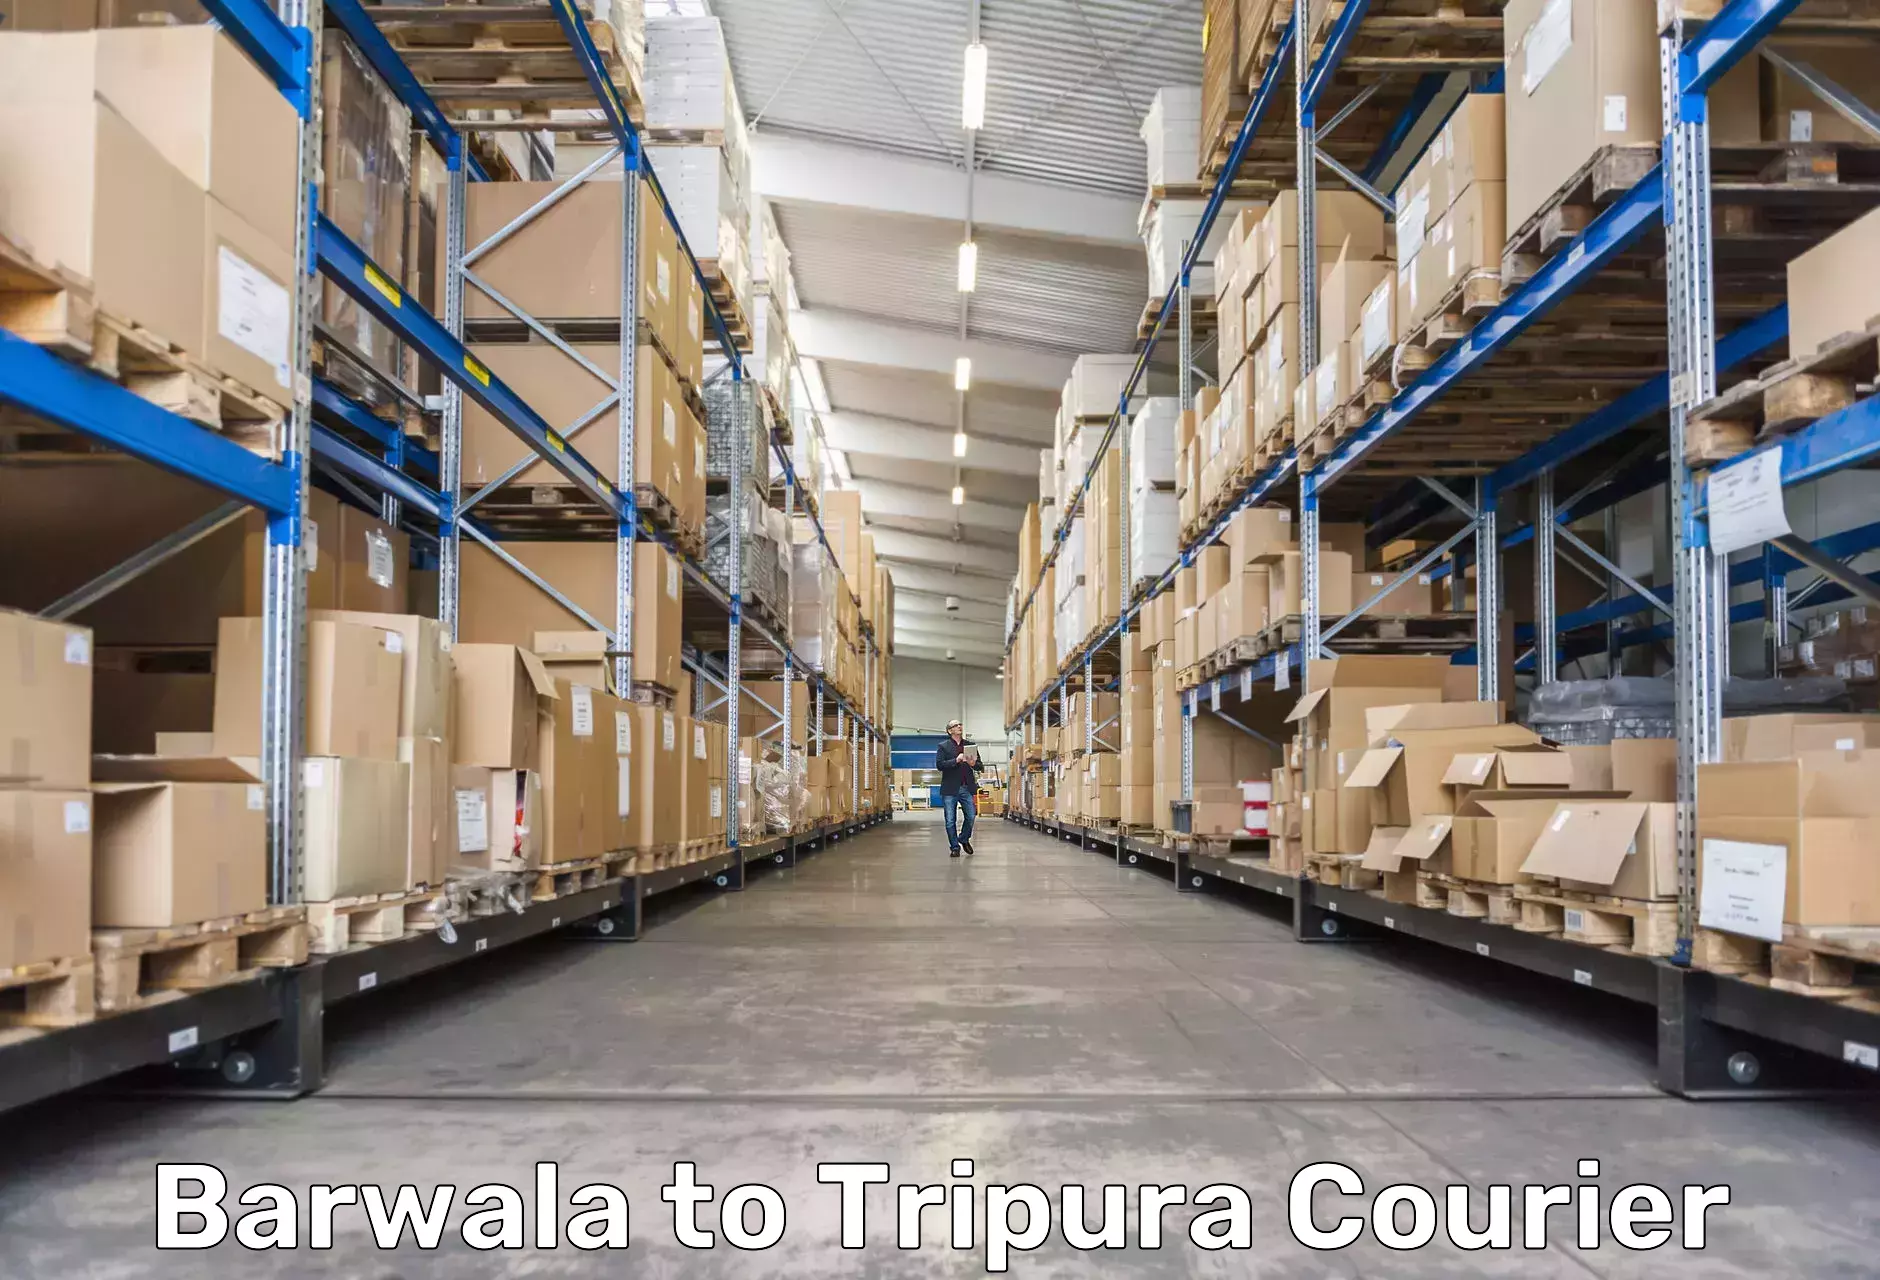 Overnight delivery services Barwala to Udaipur Tripura